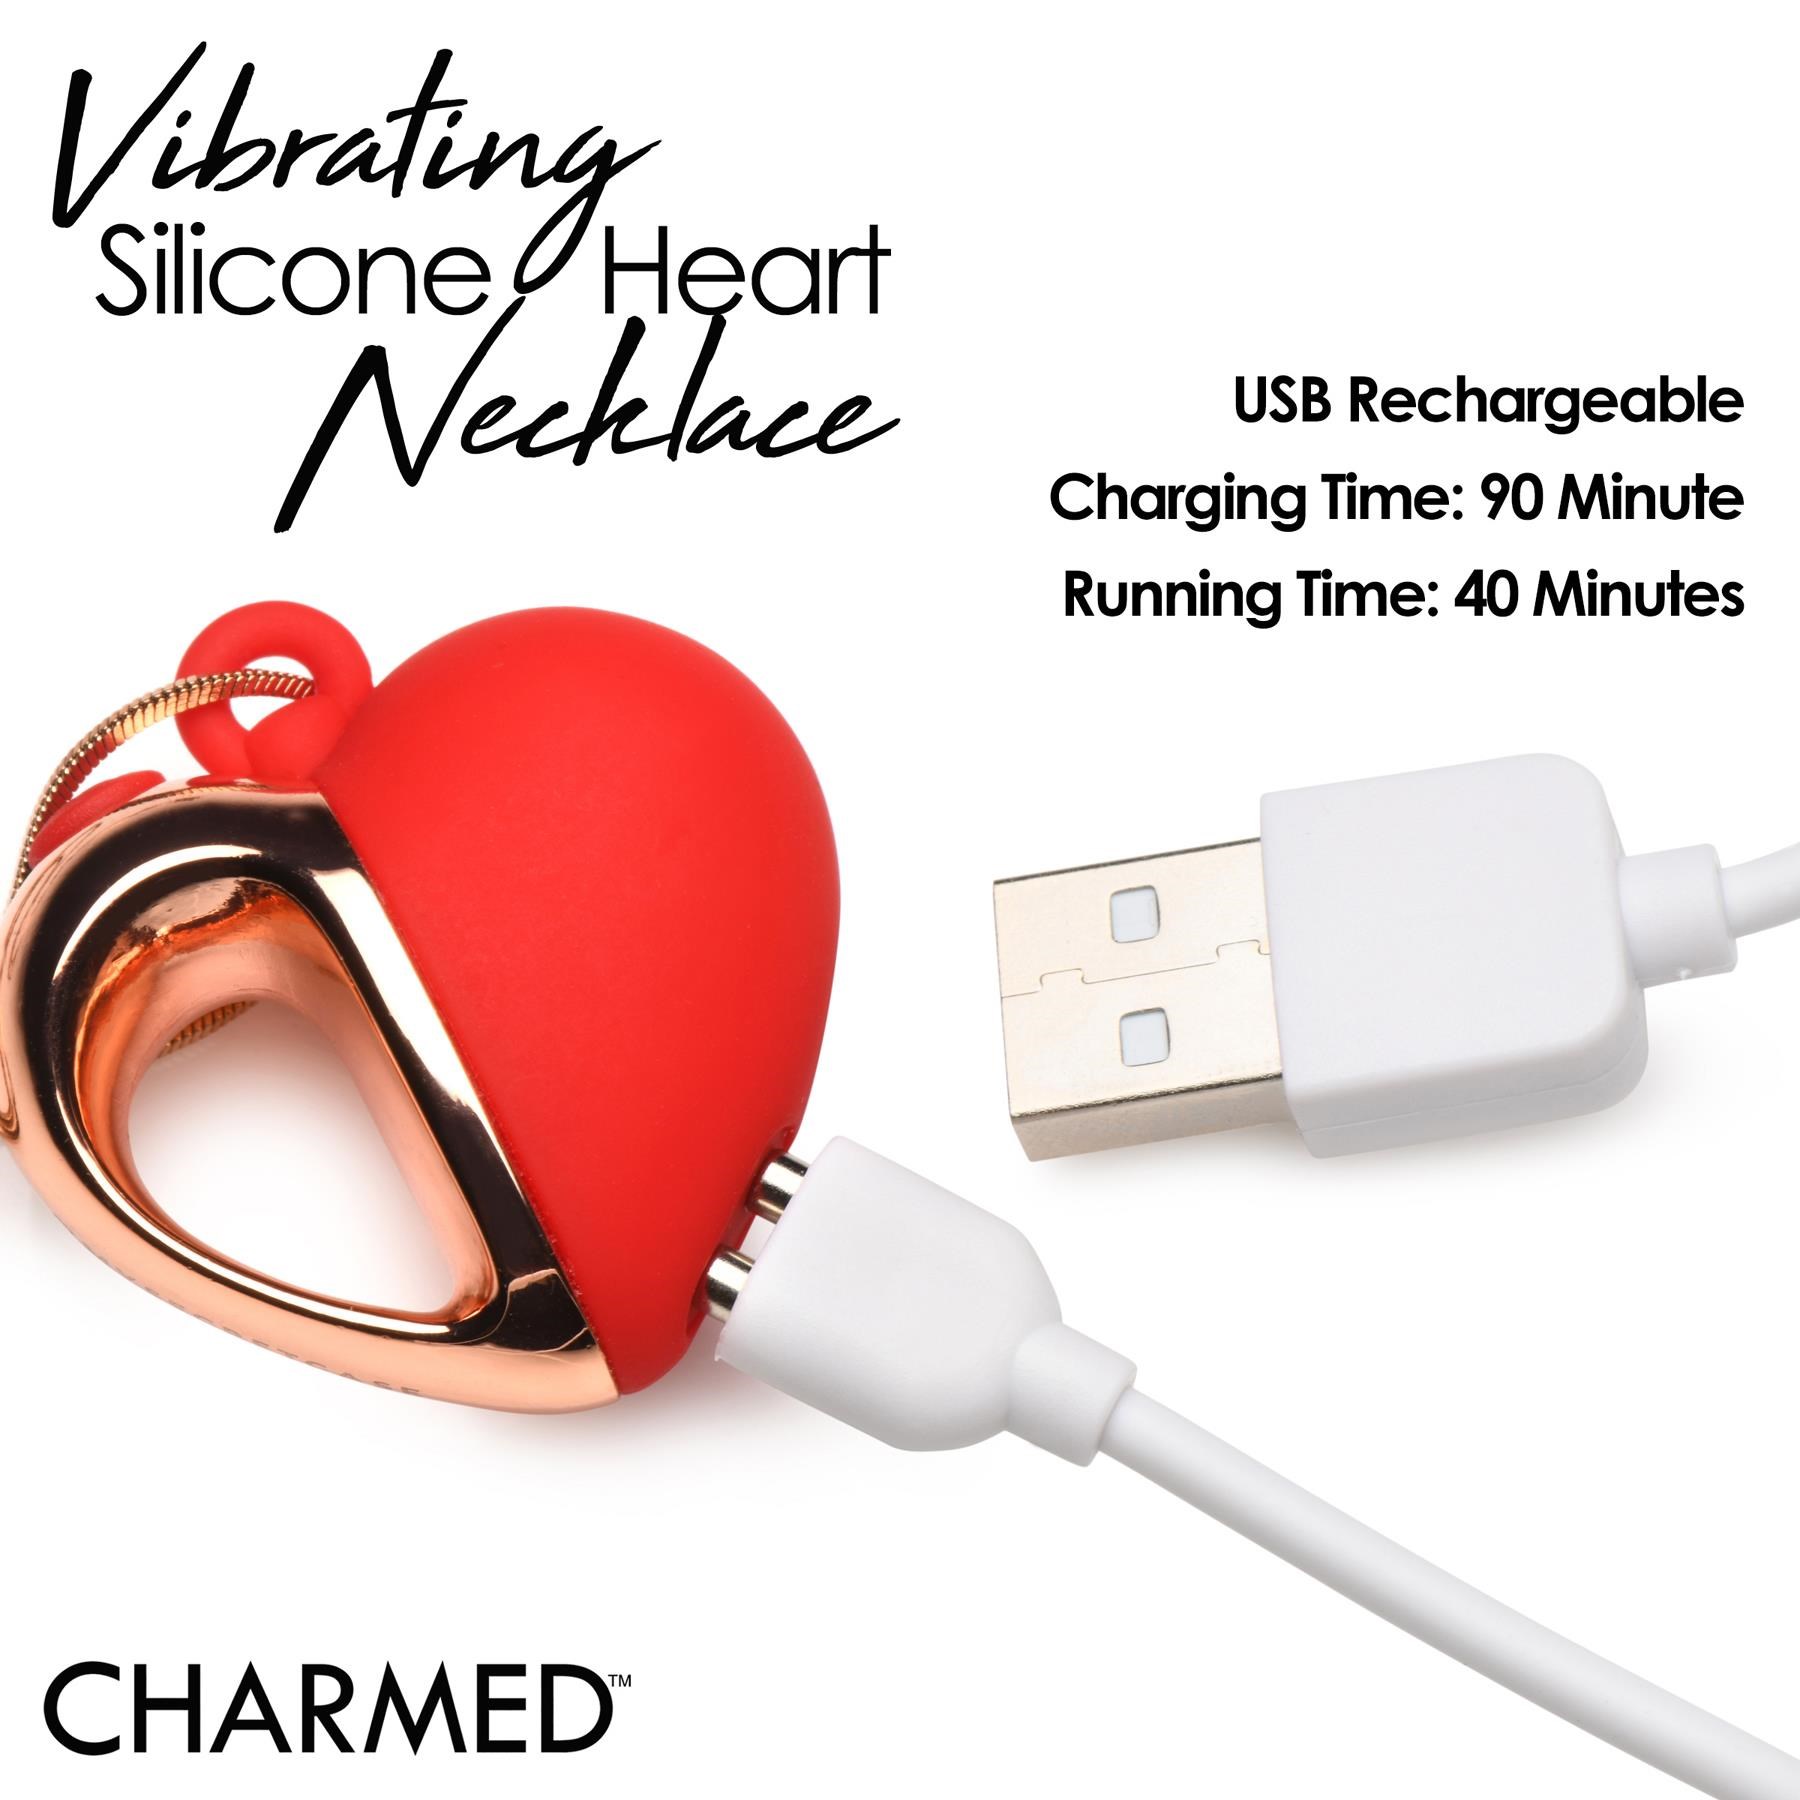 Charmed Silicone Heart Necklace - Product Shot - Showing Where Charging Cable is Placed